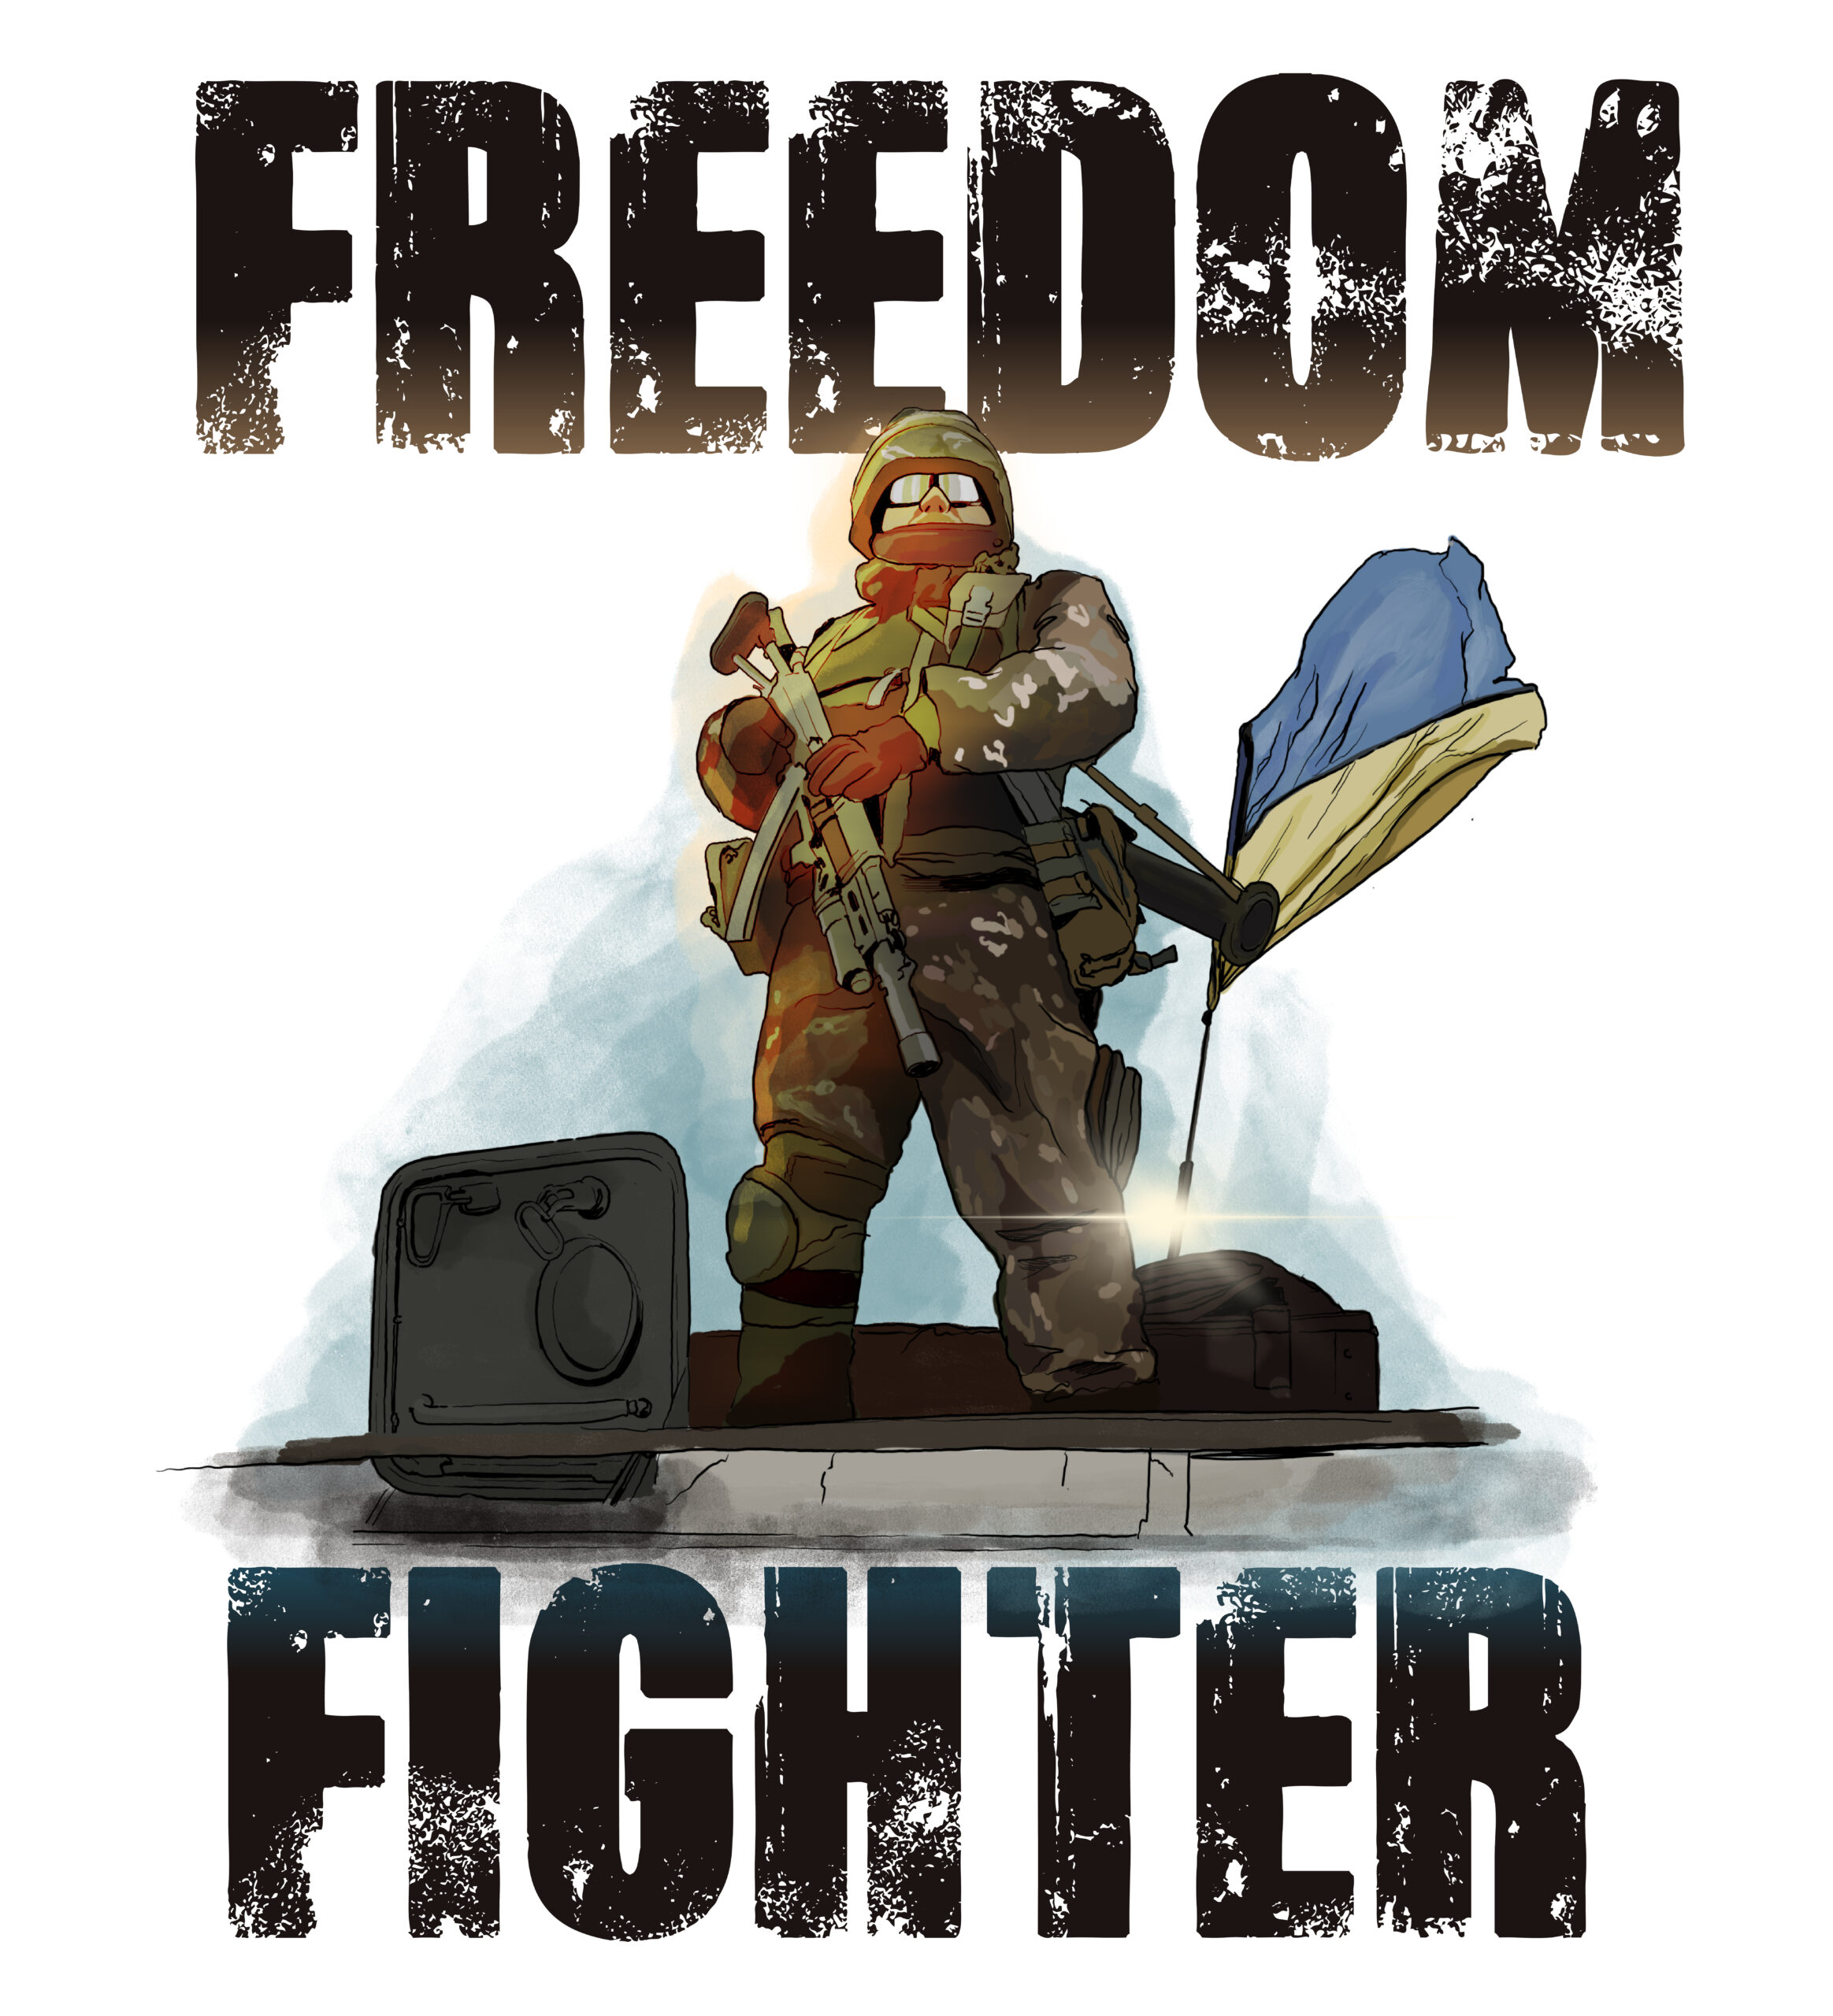 Ukraine Freedom Fighter Poster Ad Banned by Facebook Citing Poster a “Social Issue”